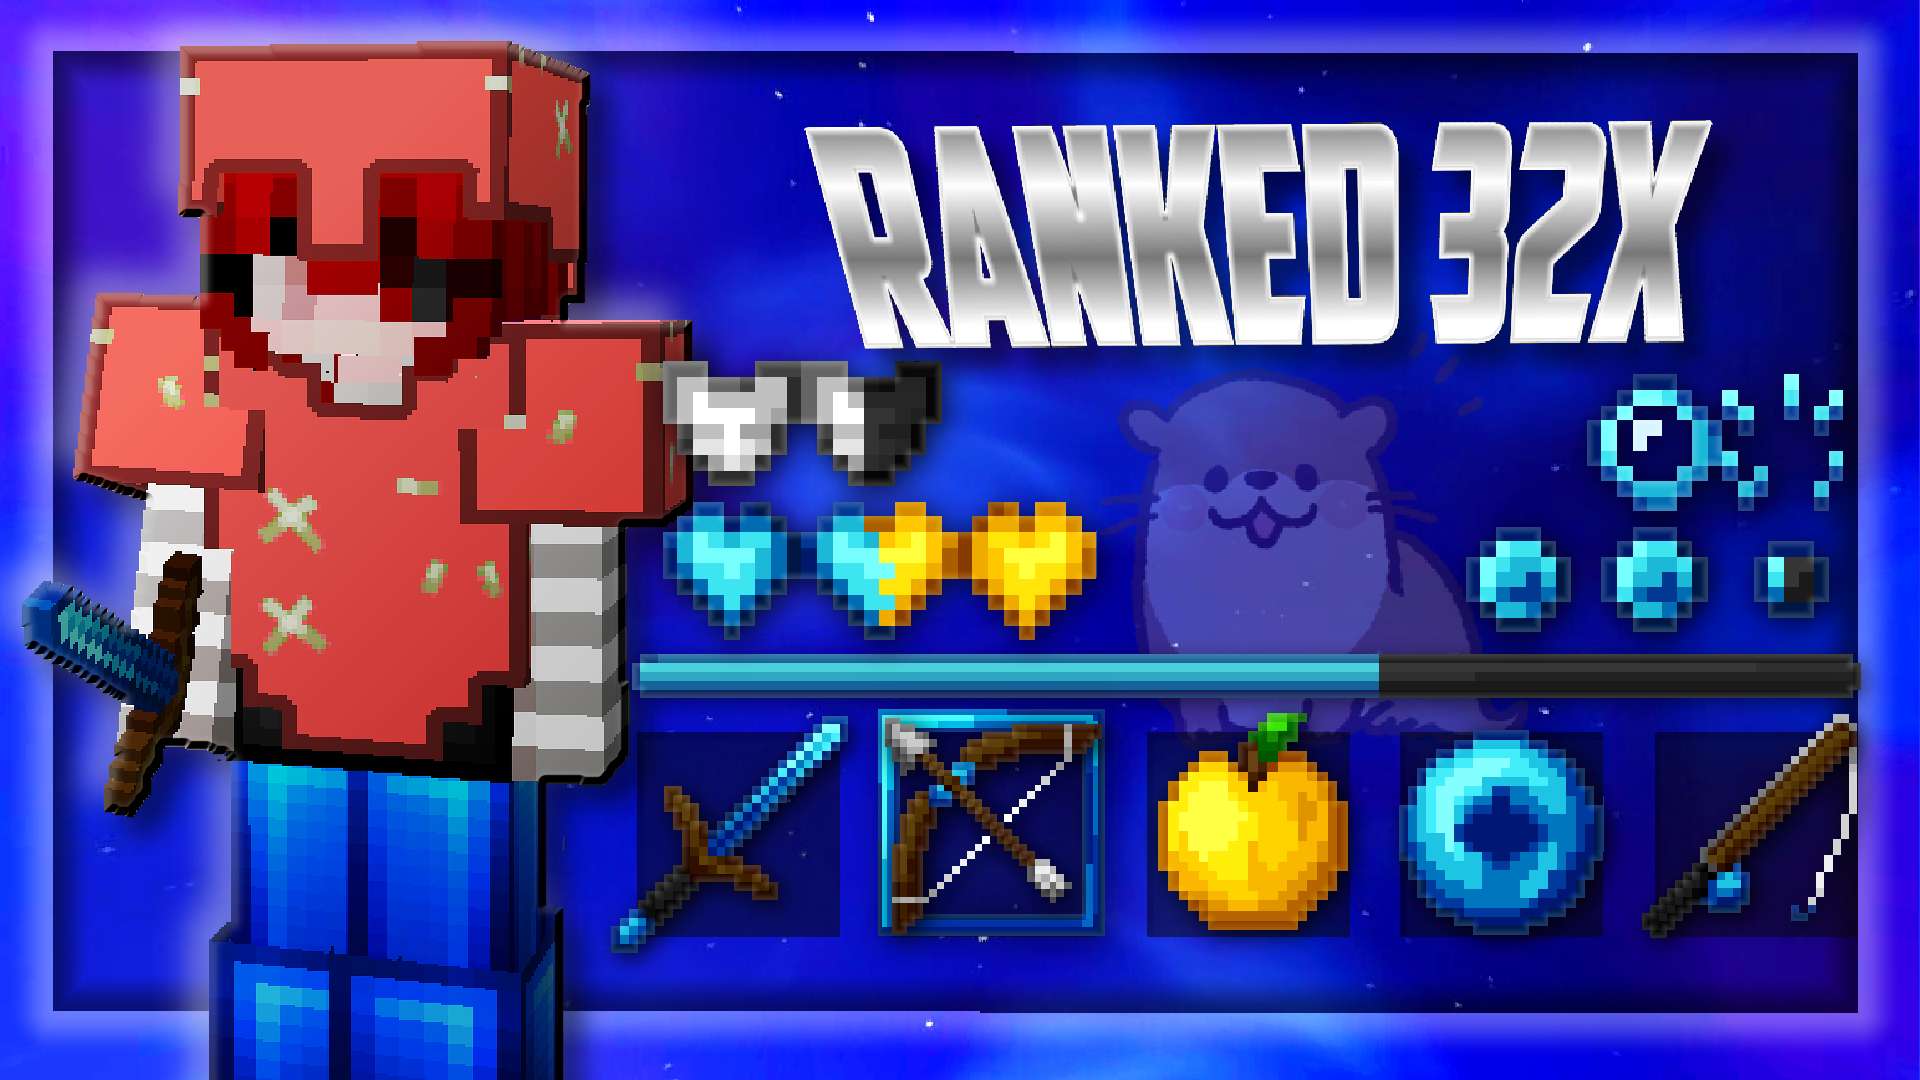 Ranked 32x by barbei on PvPRP